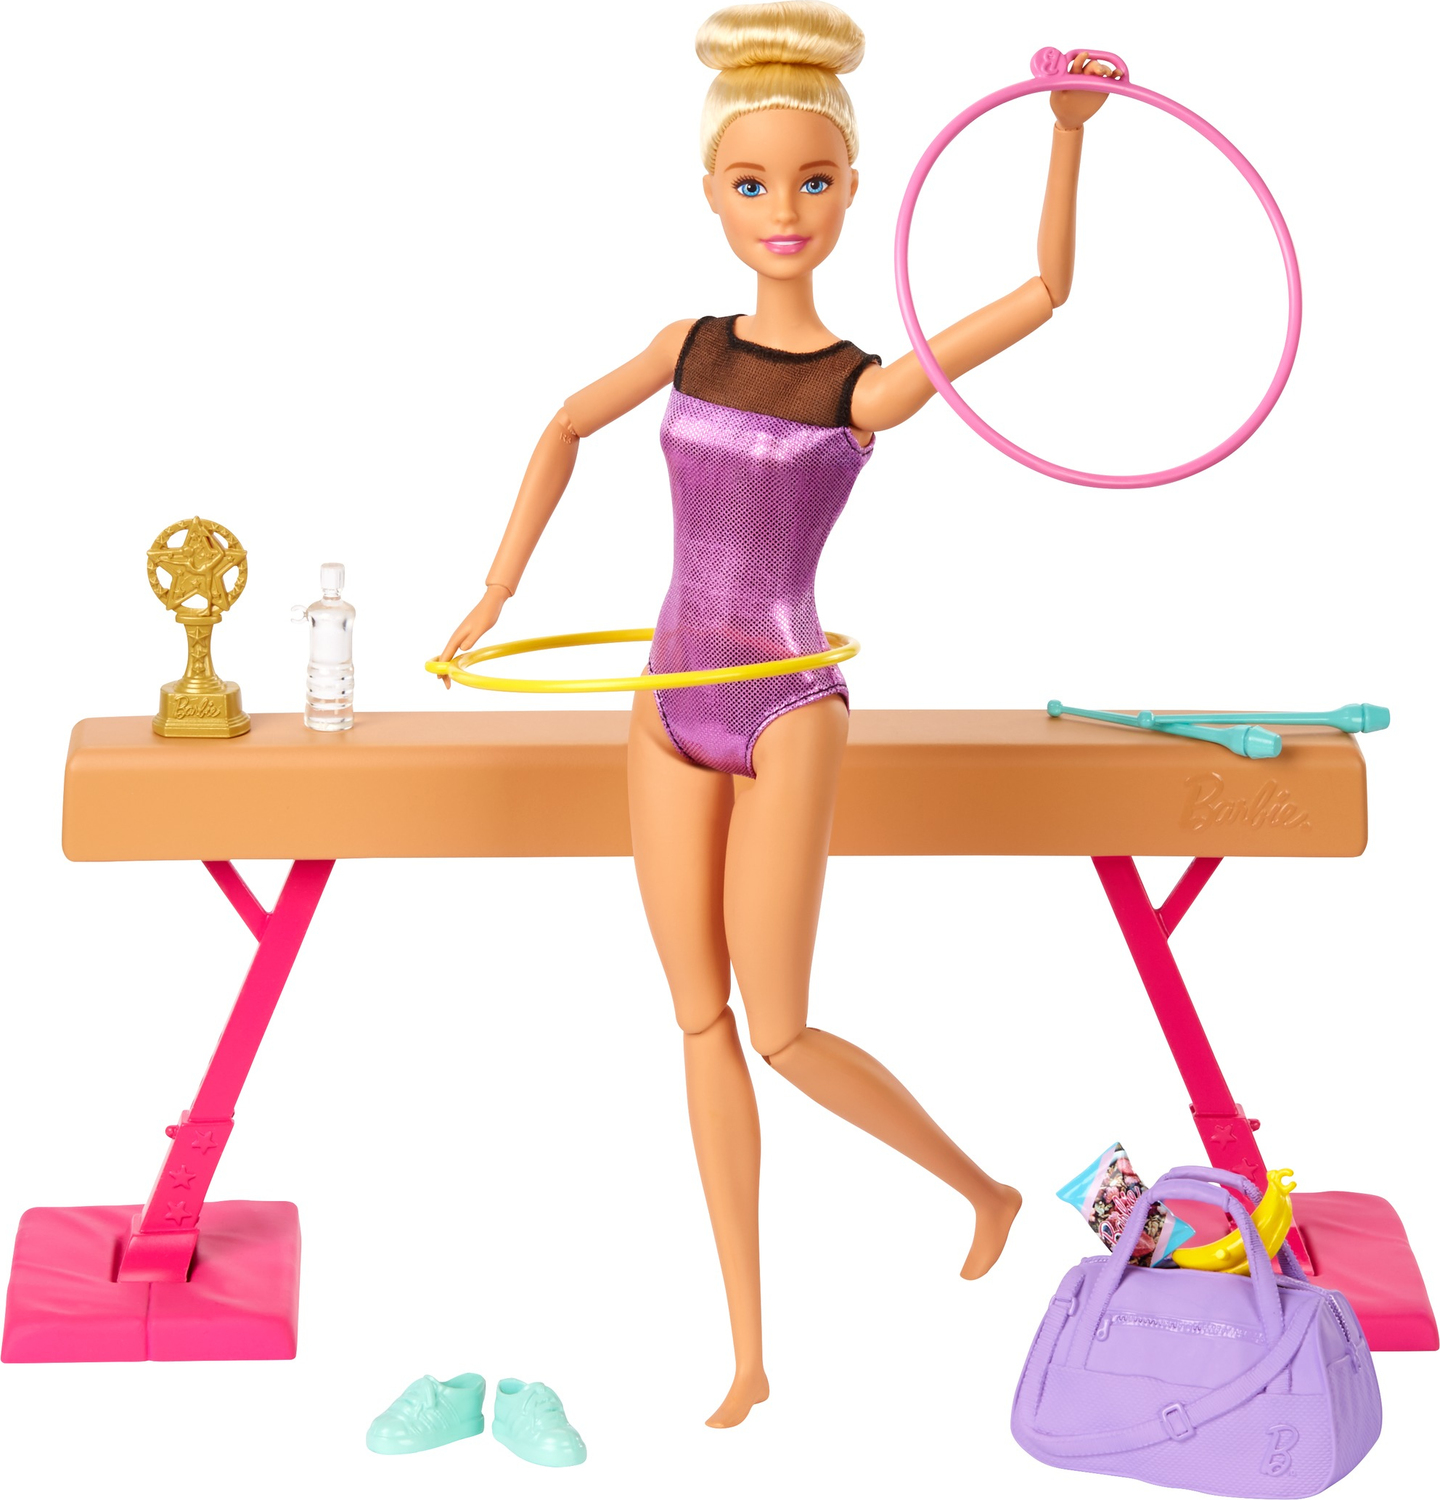 Barbie Doll And Accessories - GJM72